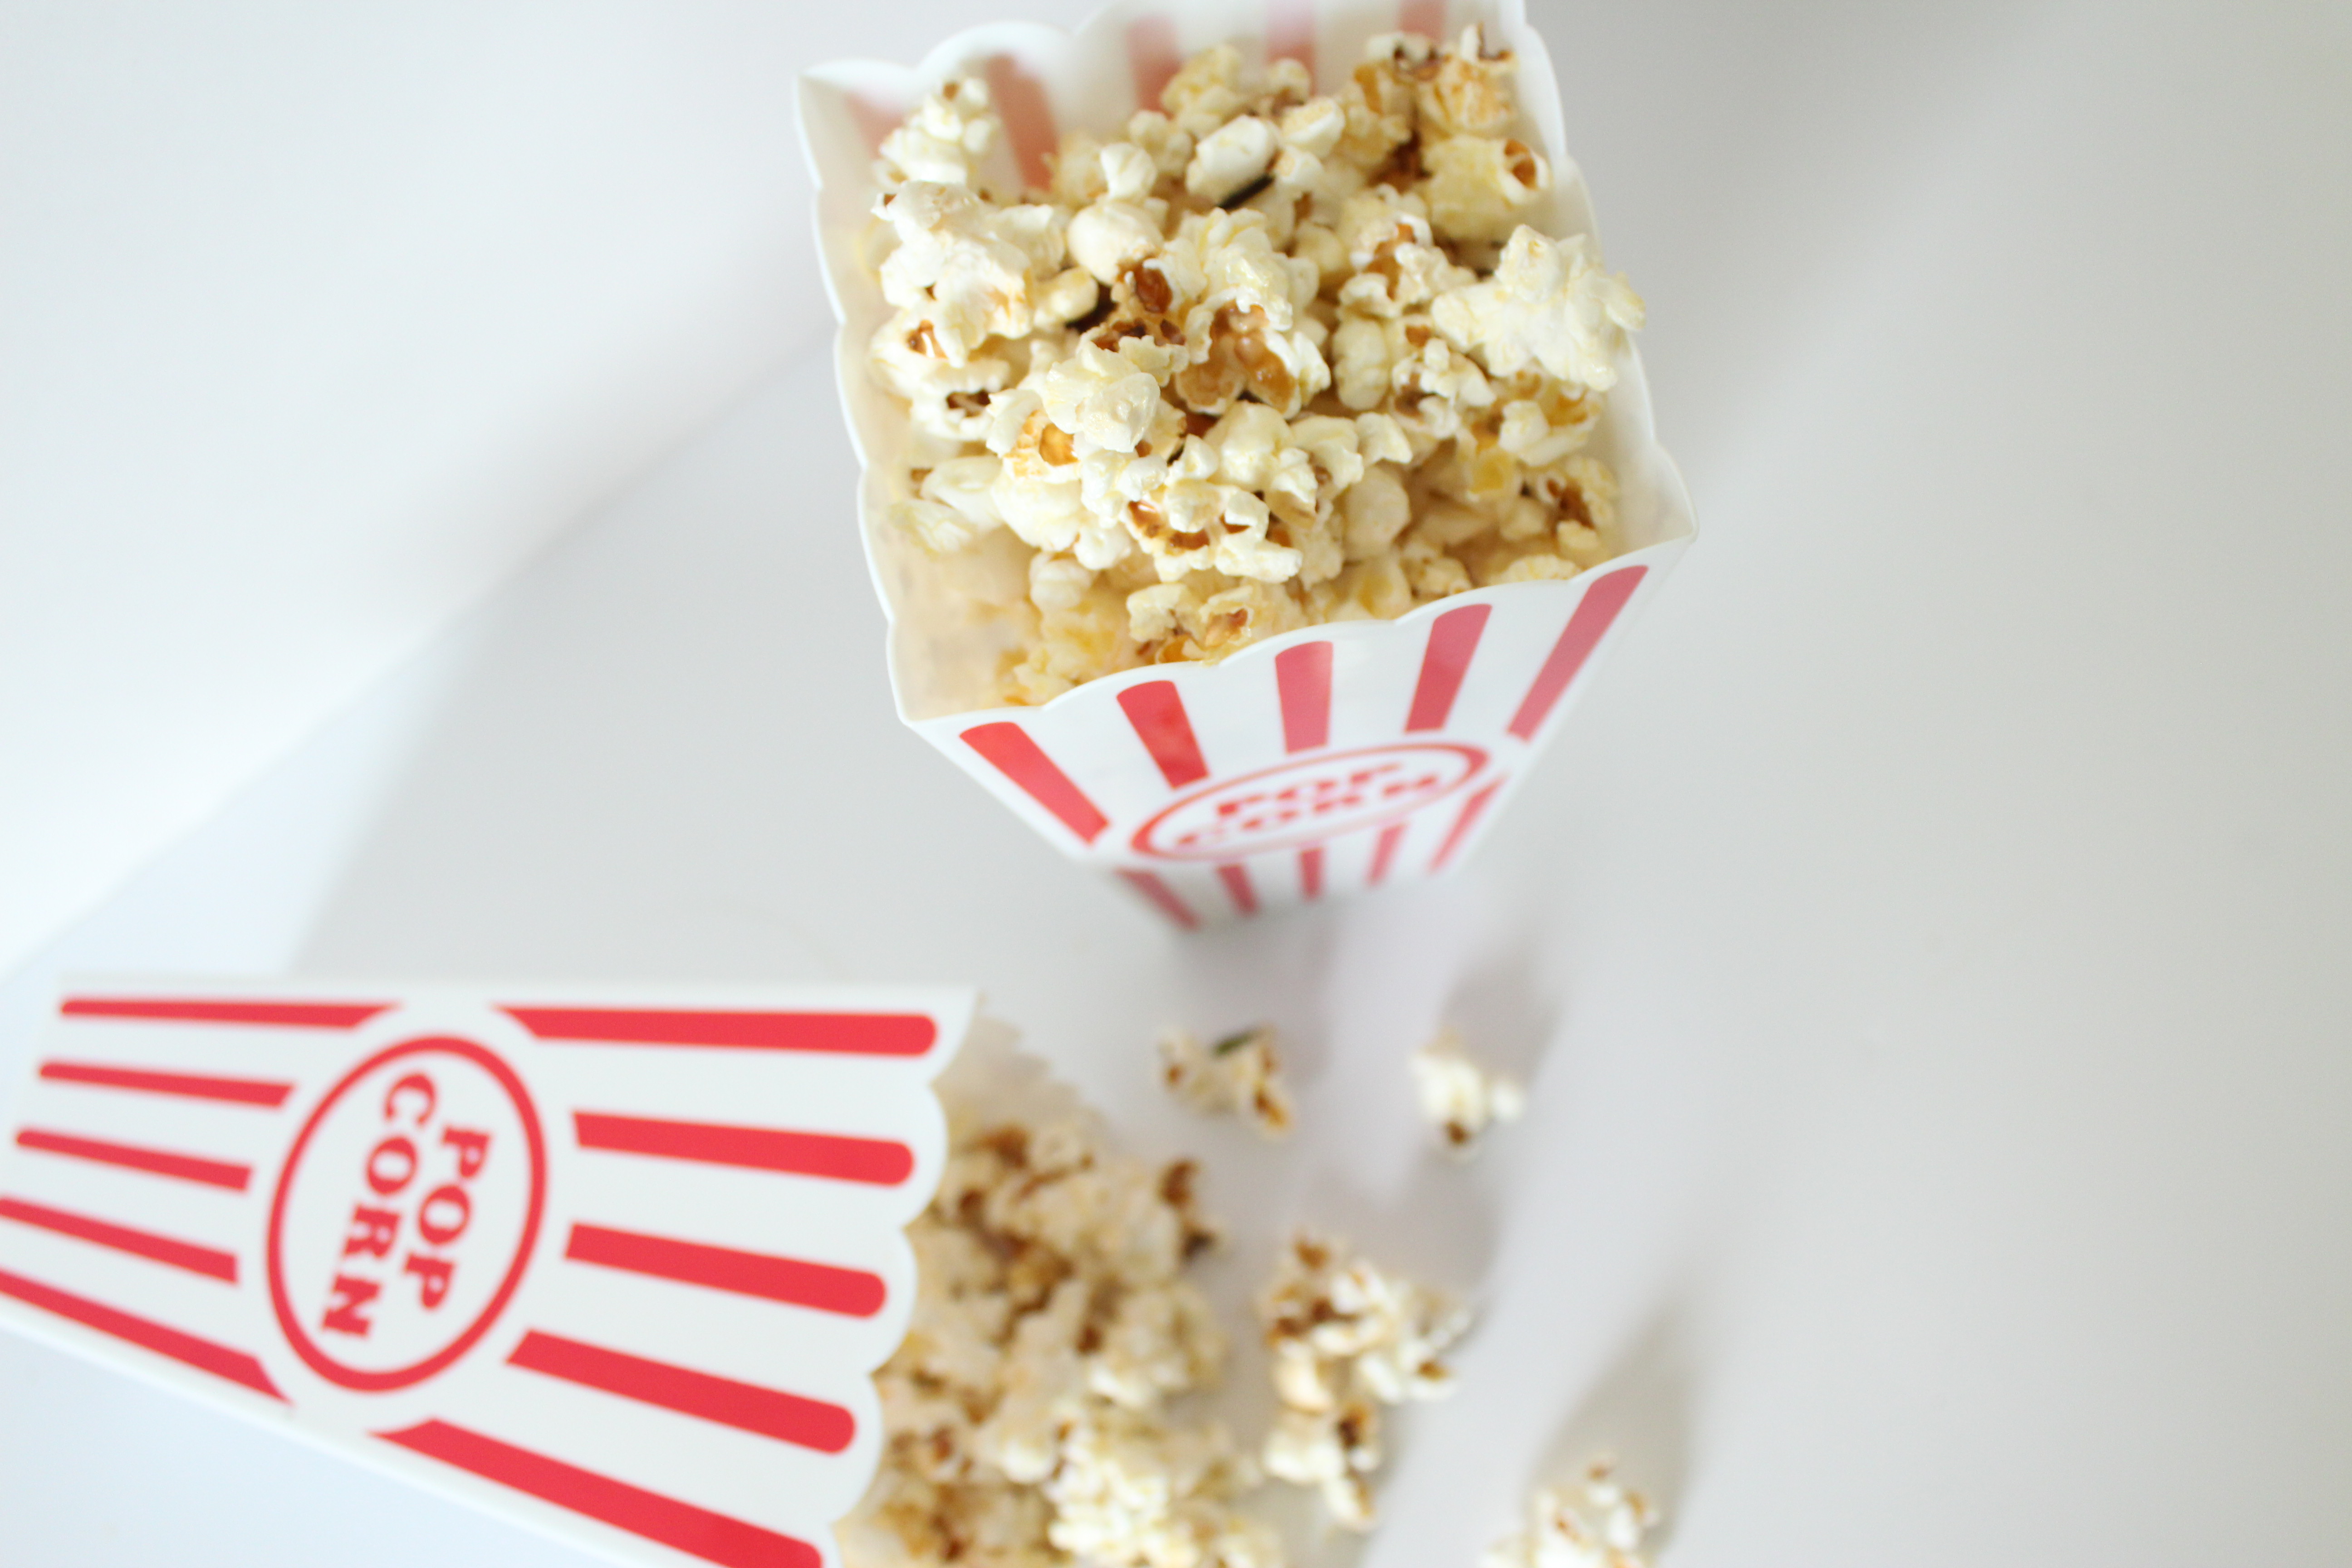 Movie theater popcorn gets its buttery flavor from oils. The at home version is a much better option and very easy.